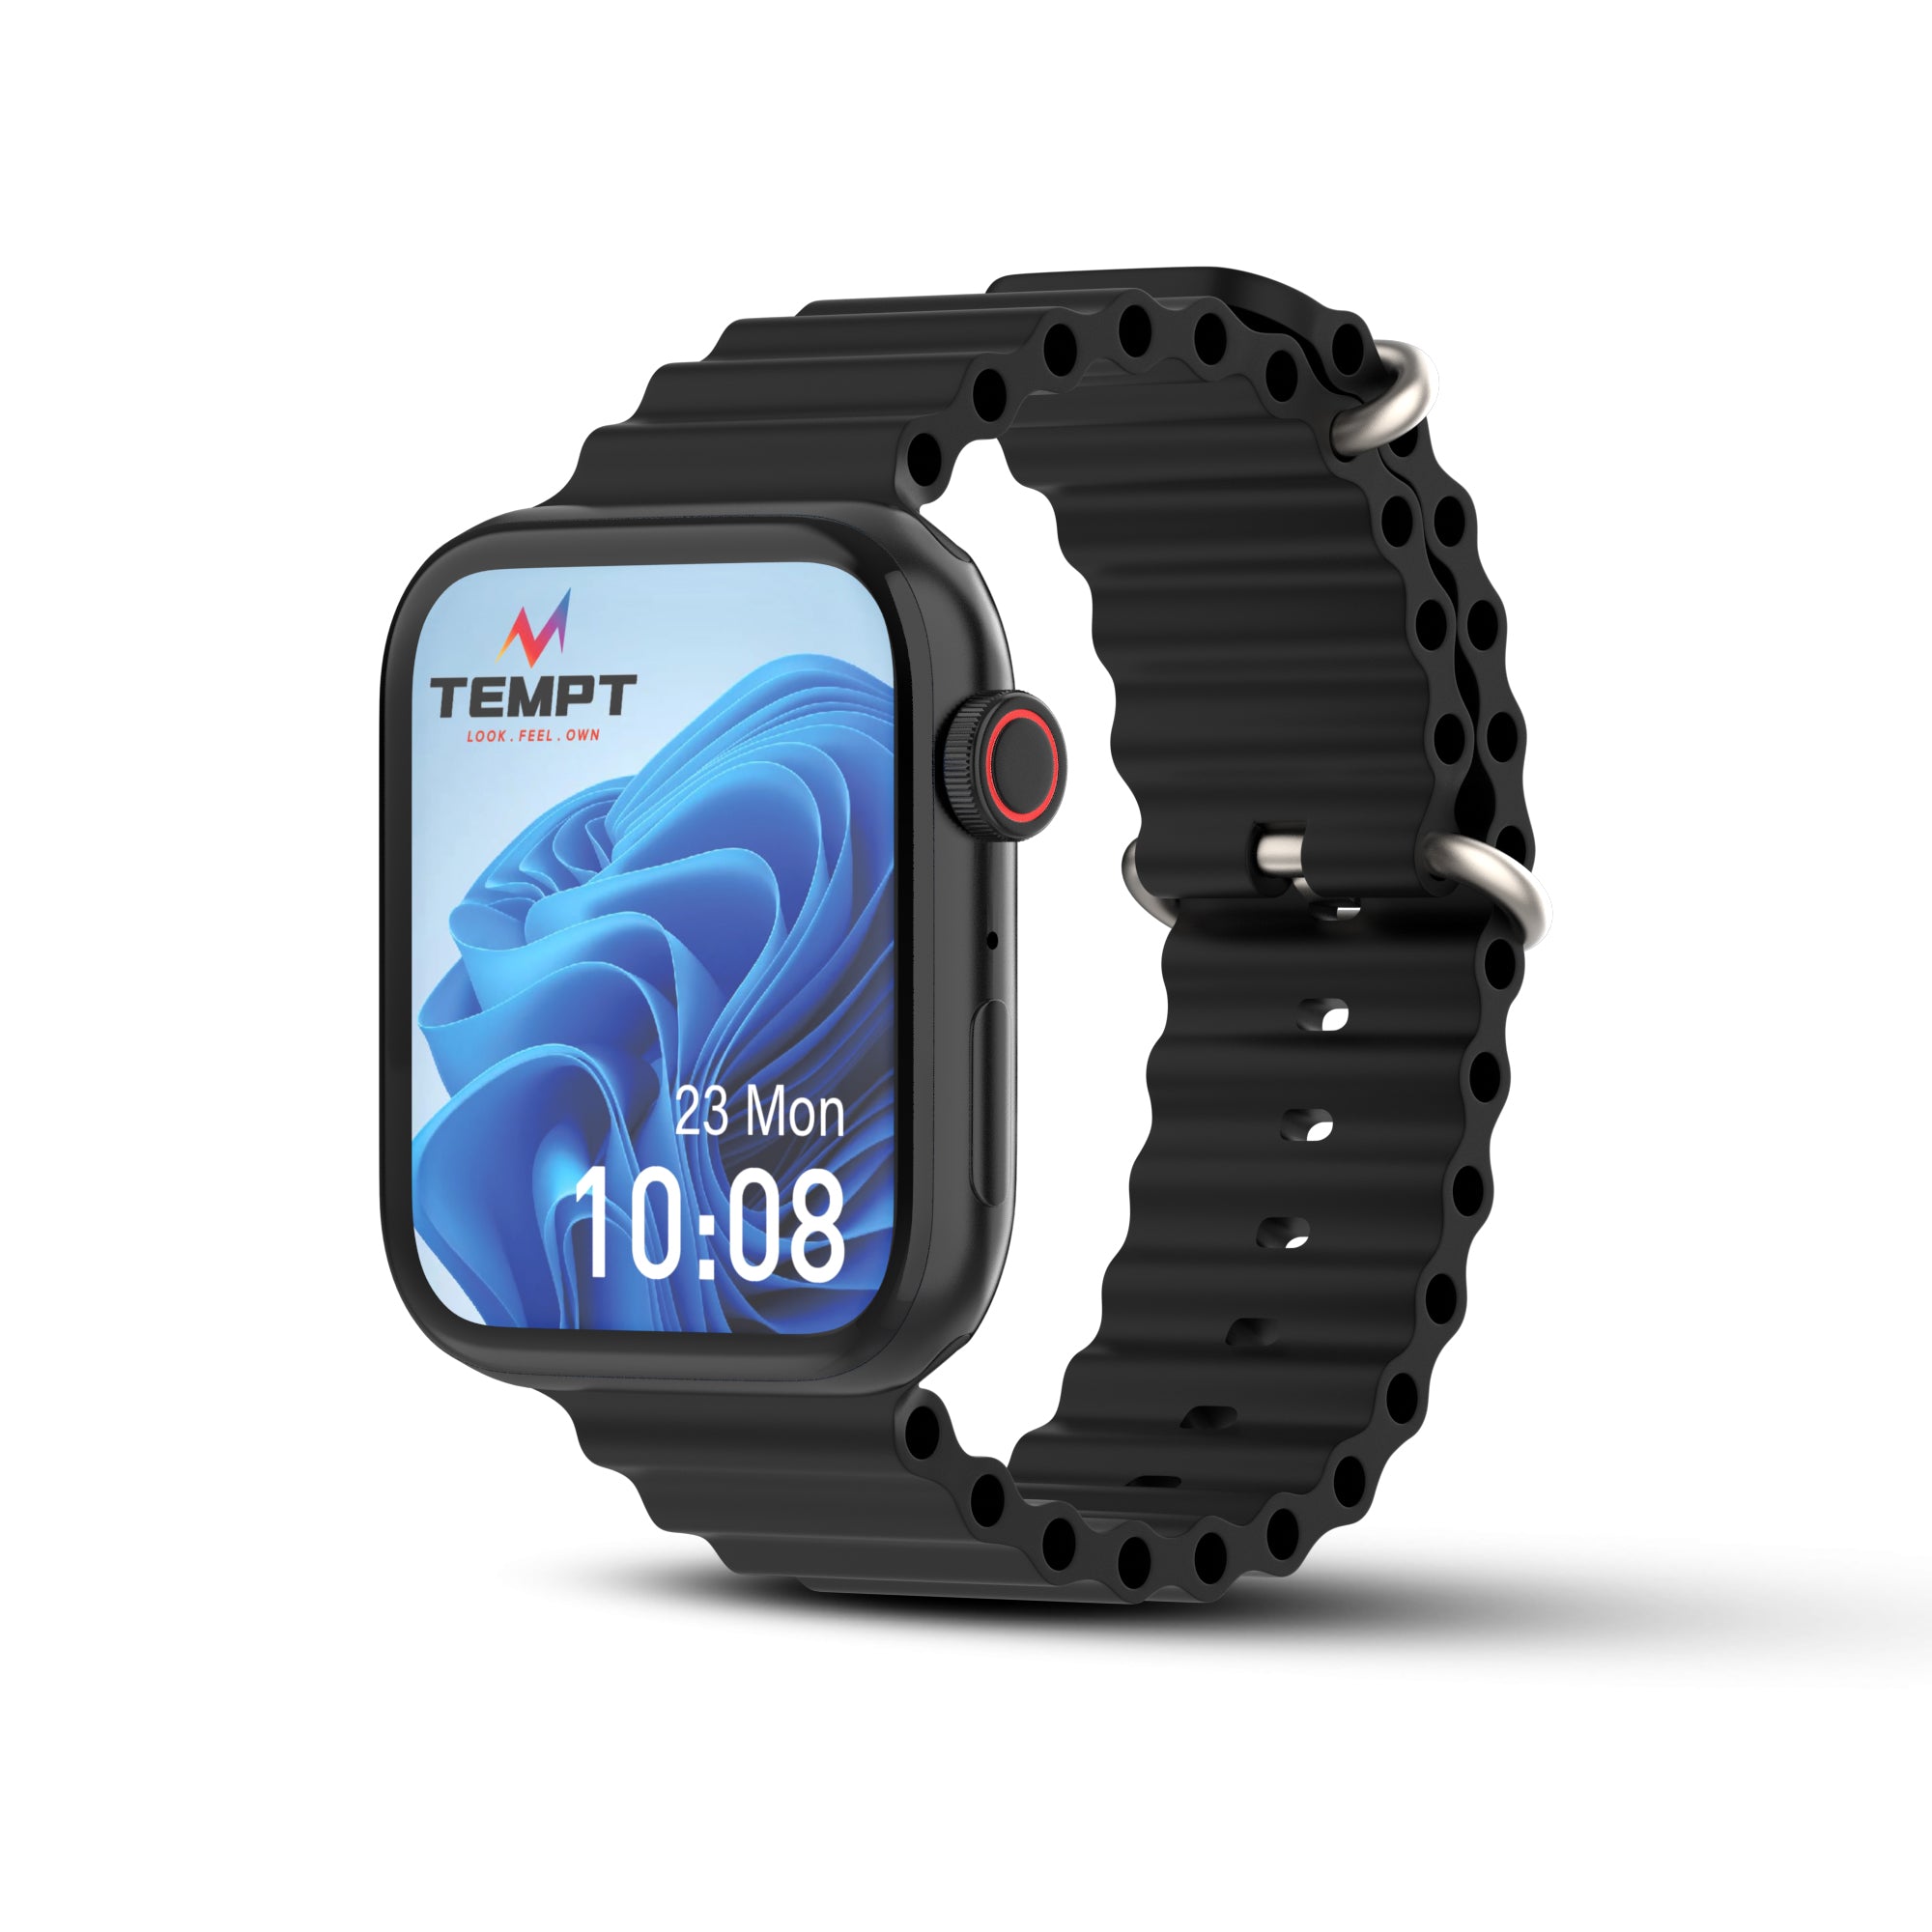 Smart Watch with TWS Bluetooth Earbuds 2 in 1| Homepoint.pk